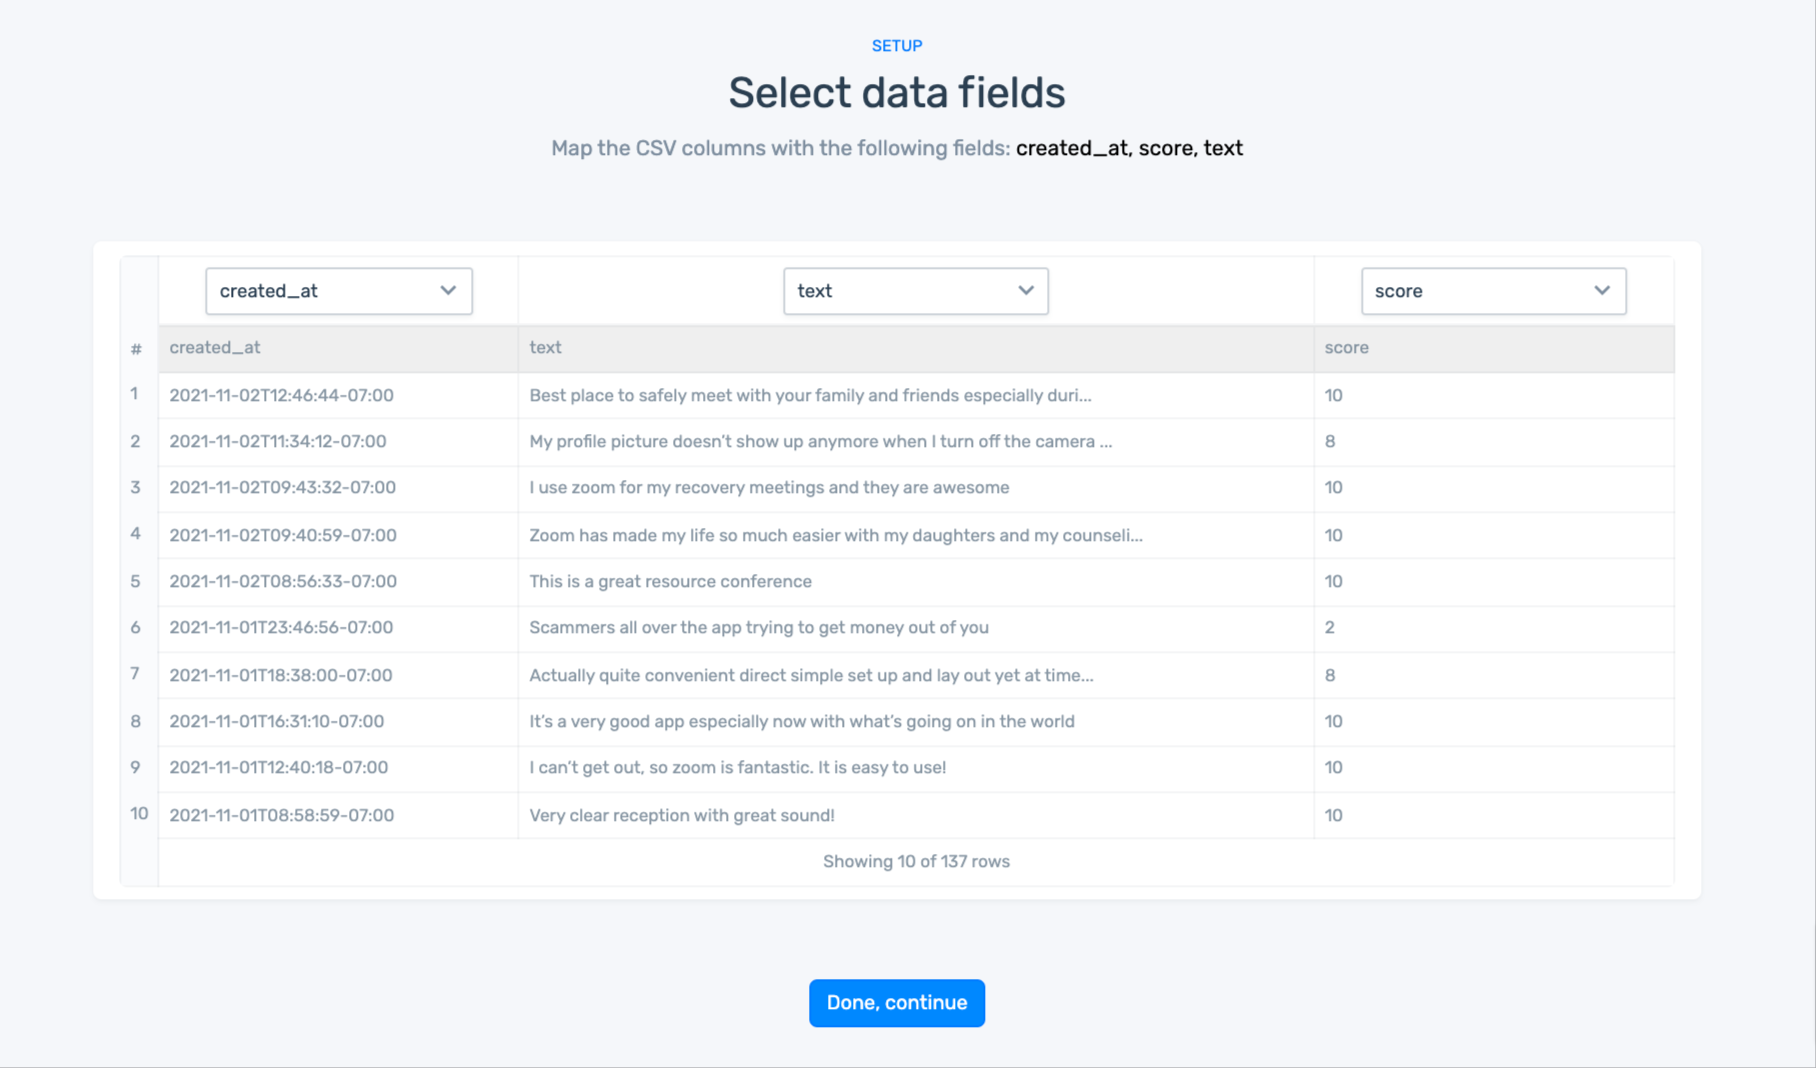 Select data fields, map the CSV columns with the following fields